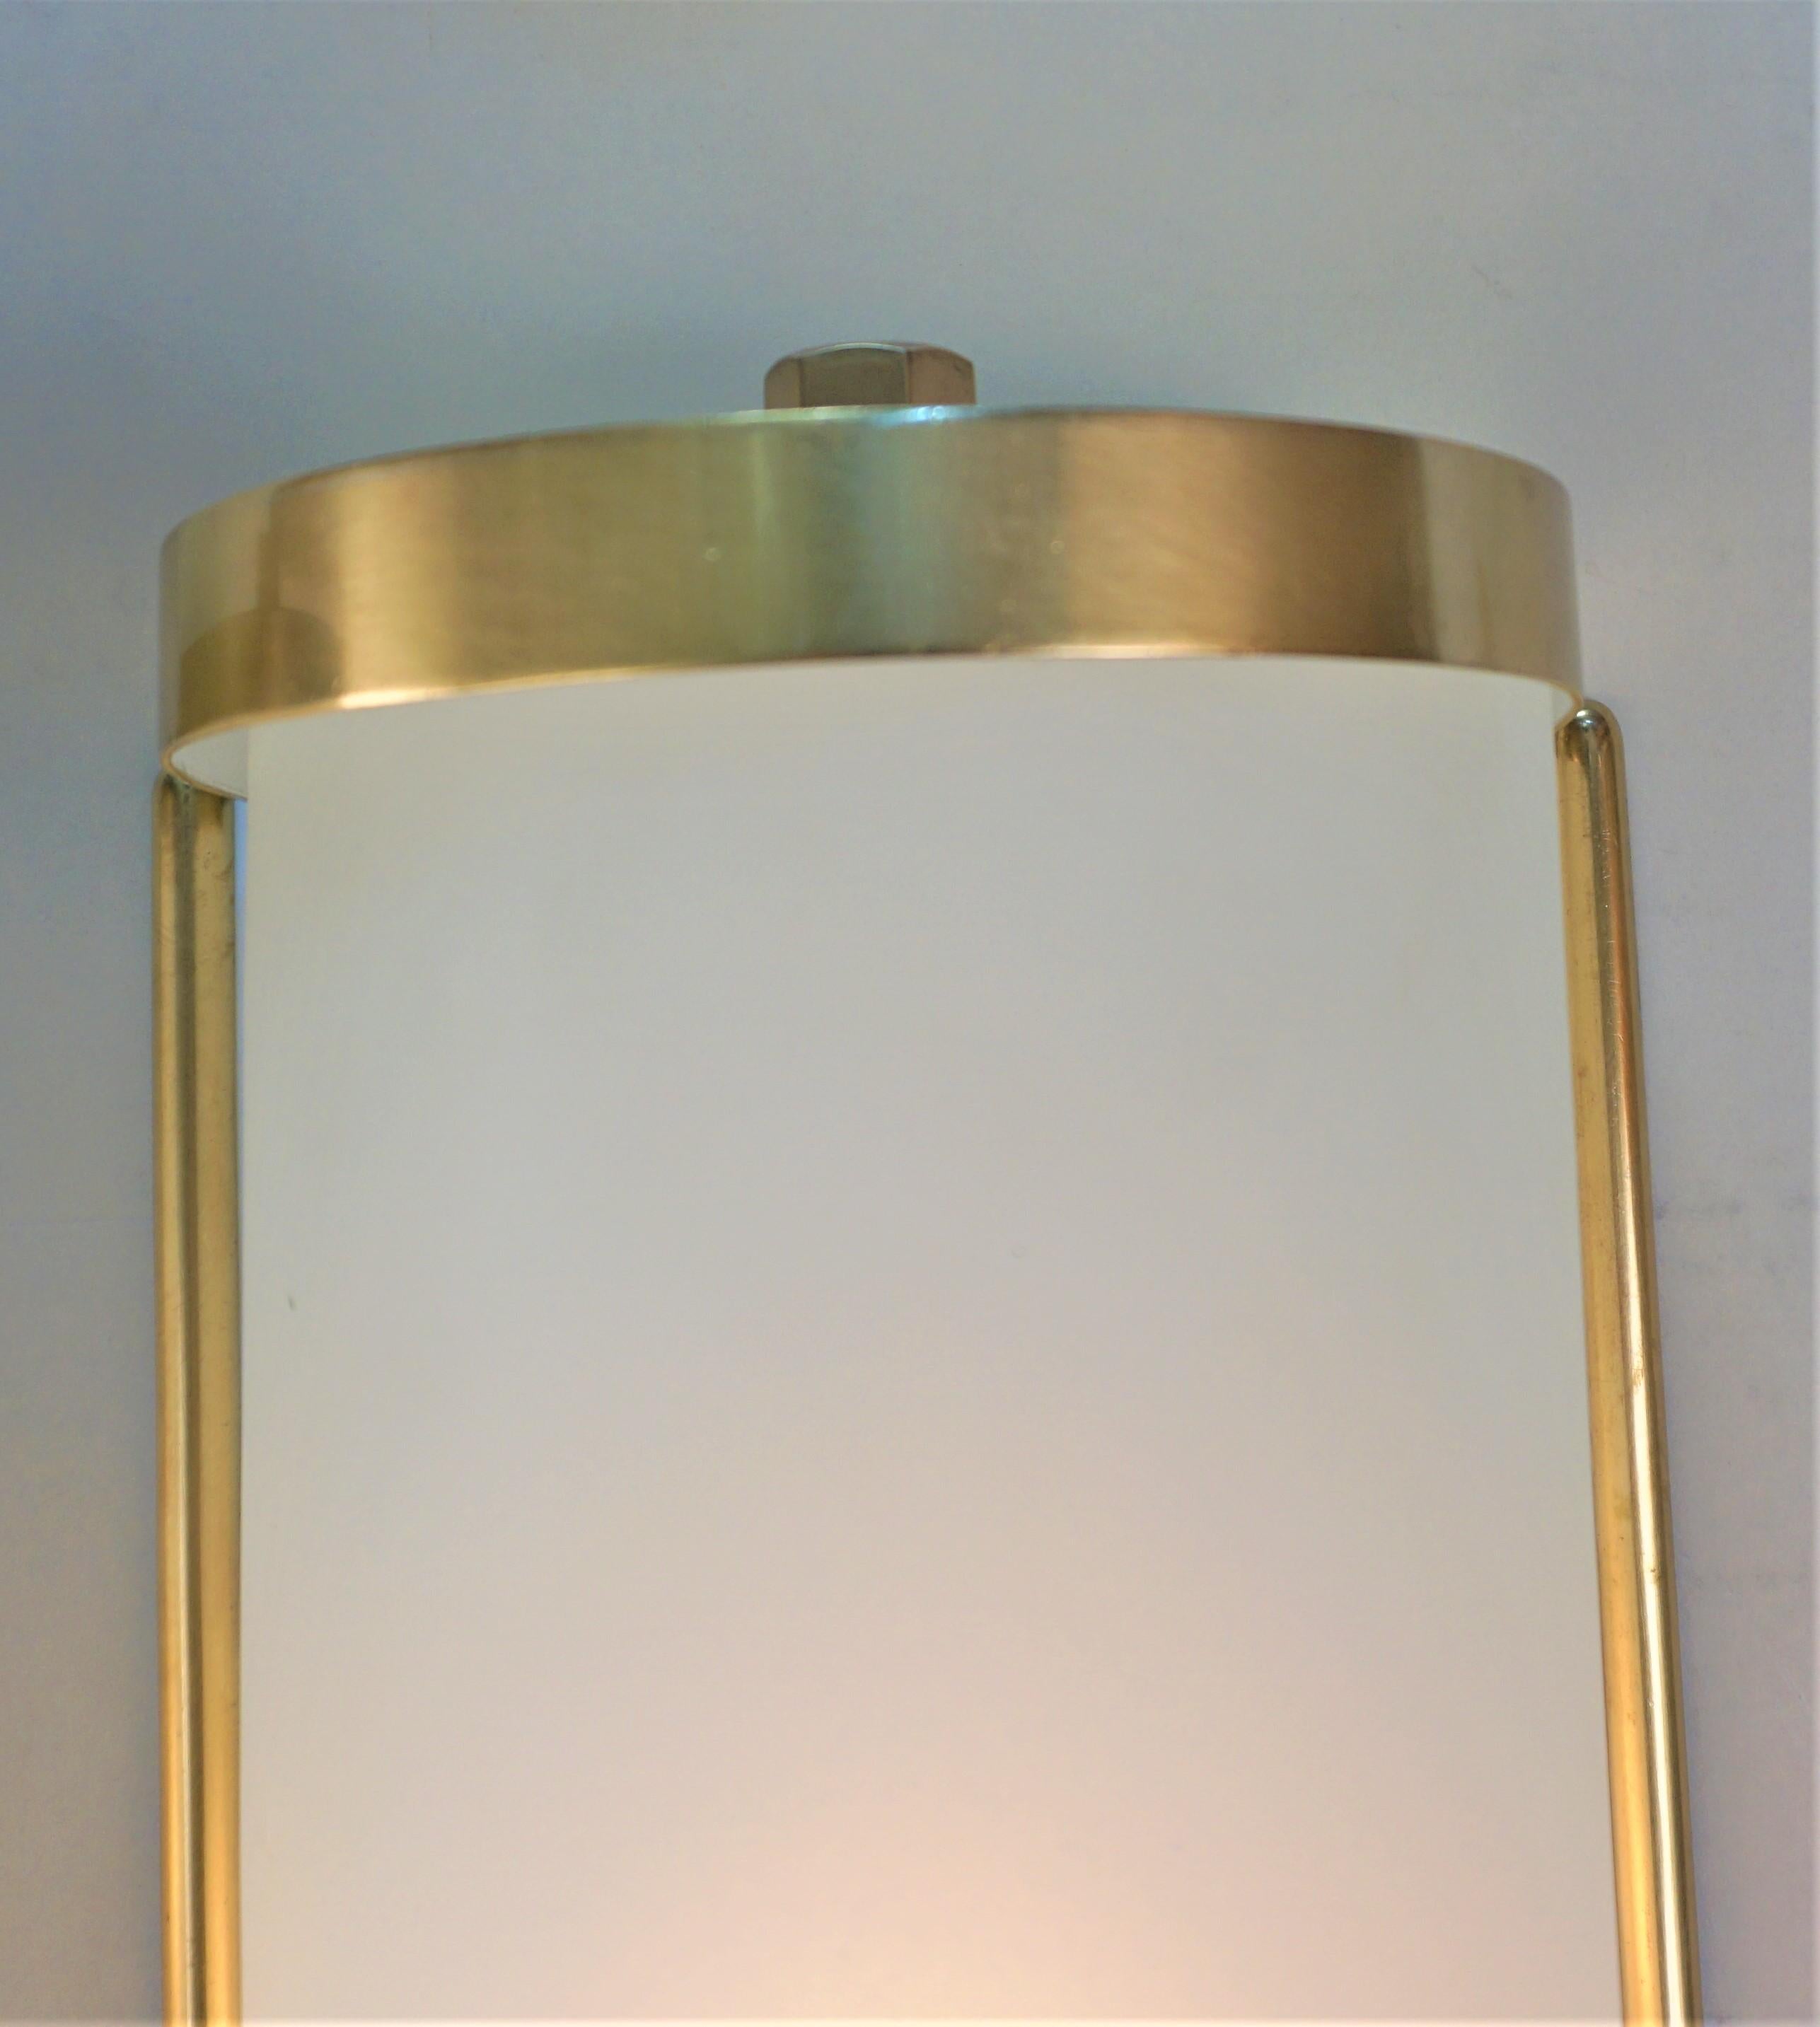 Pair of 1930's Art Deco Wall Sconces In Good Condition For Sale In Fairfax, VA